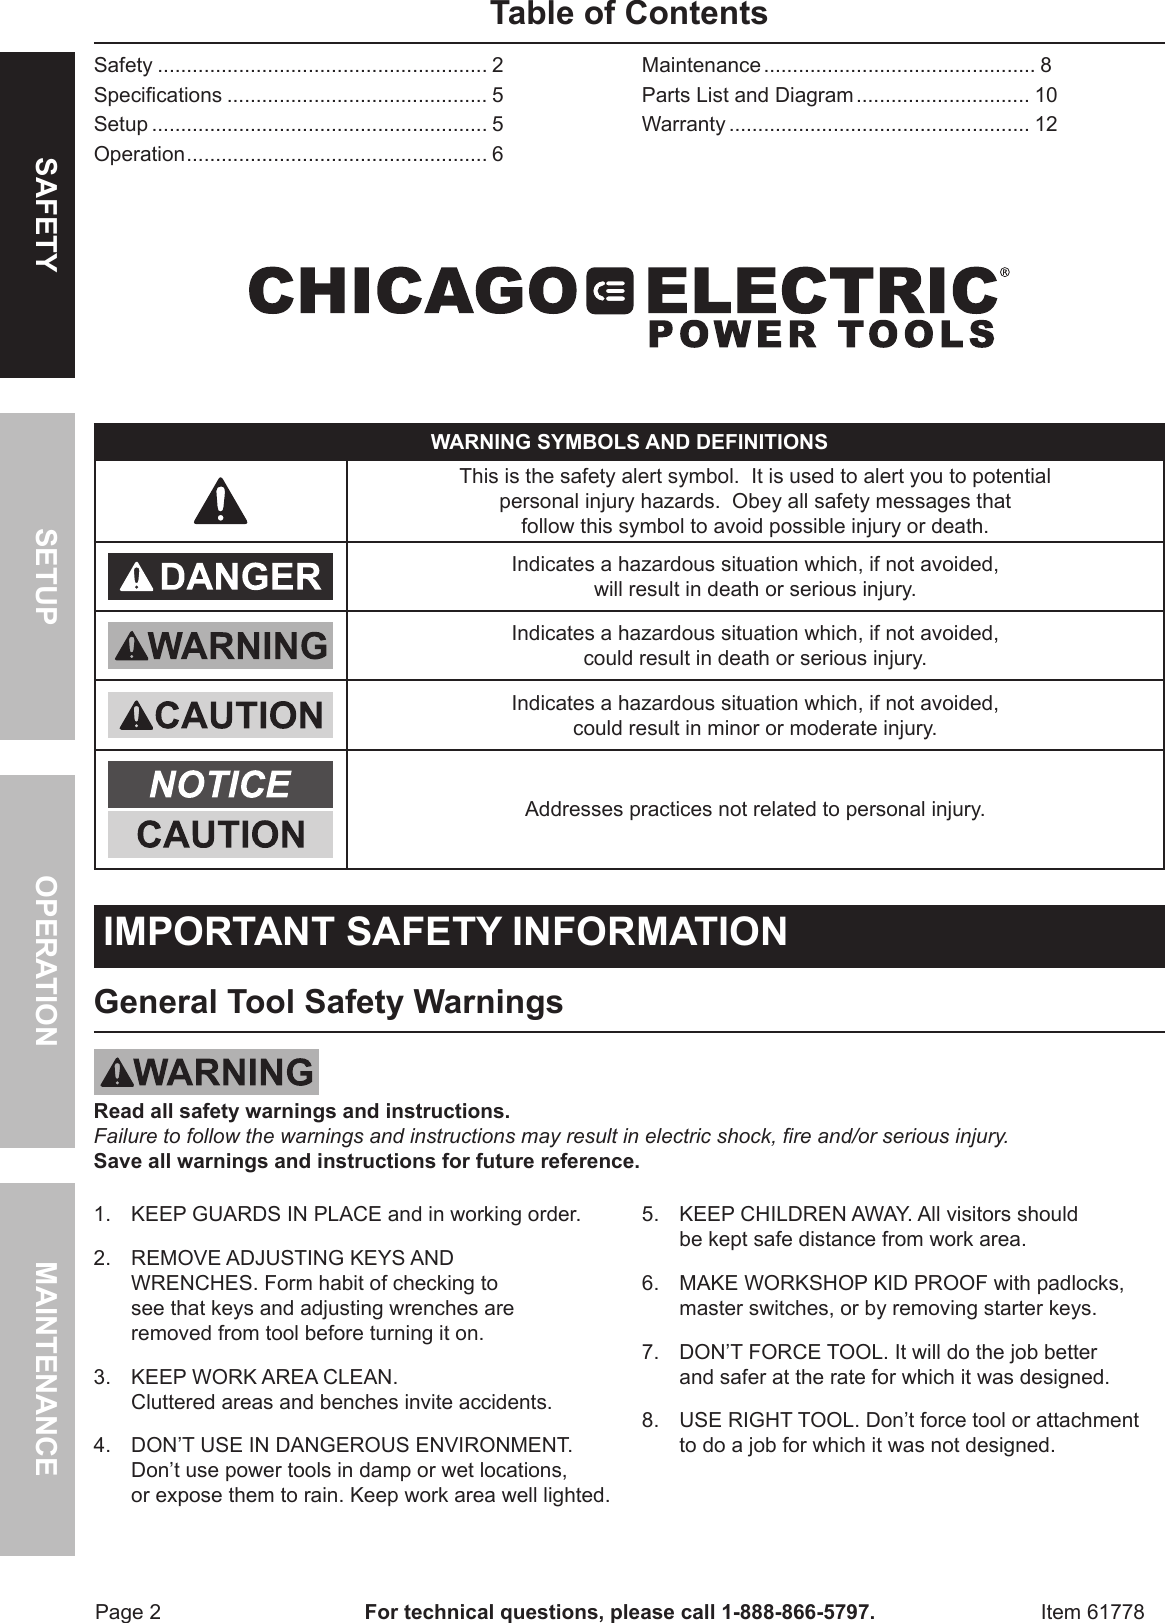 Page 2 of 12 - Harbor-Freight Harbor-Freight-Electric-Drill-Bit-Sharpener-Product-Manual-  Harbor-freight-electric-drill-bit-sharpener-product-manual